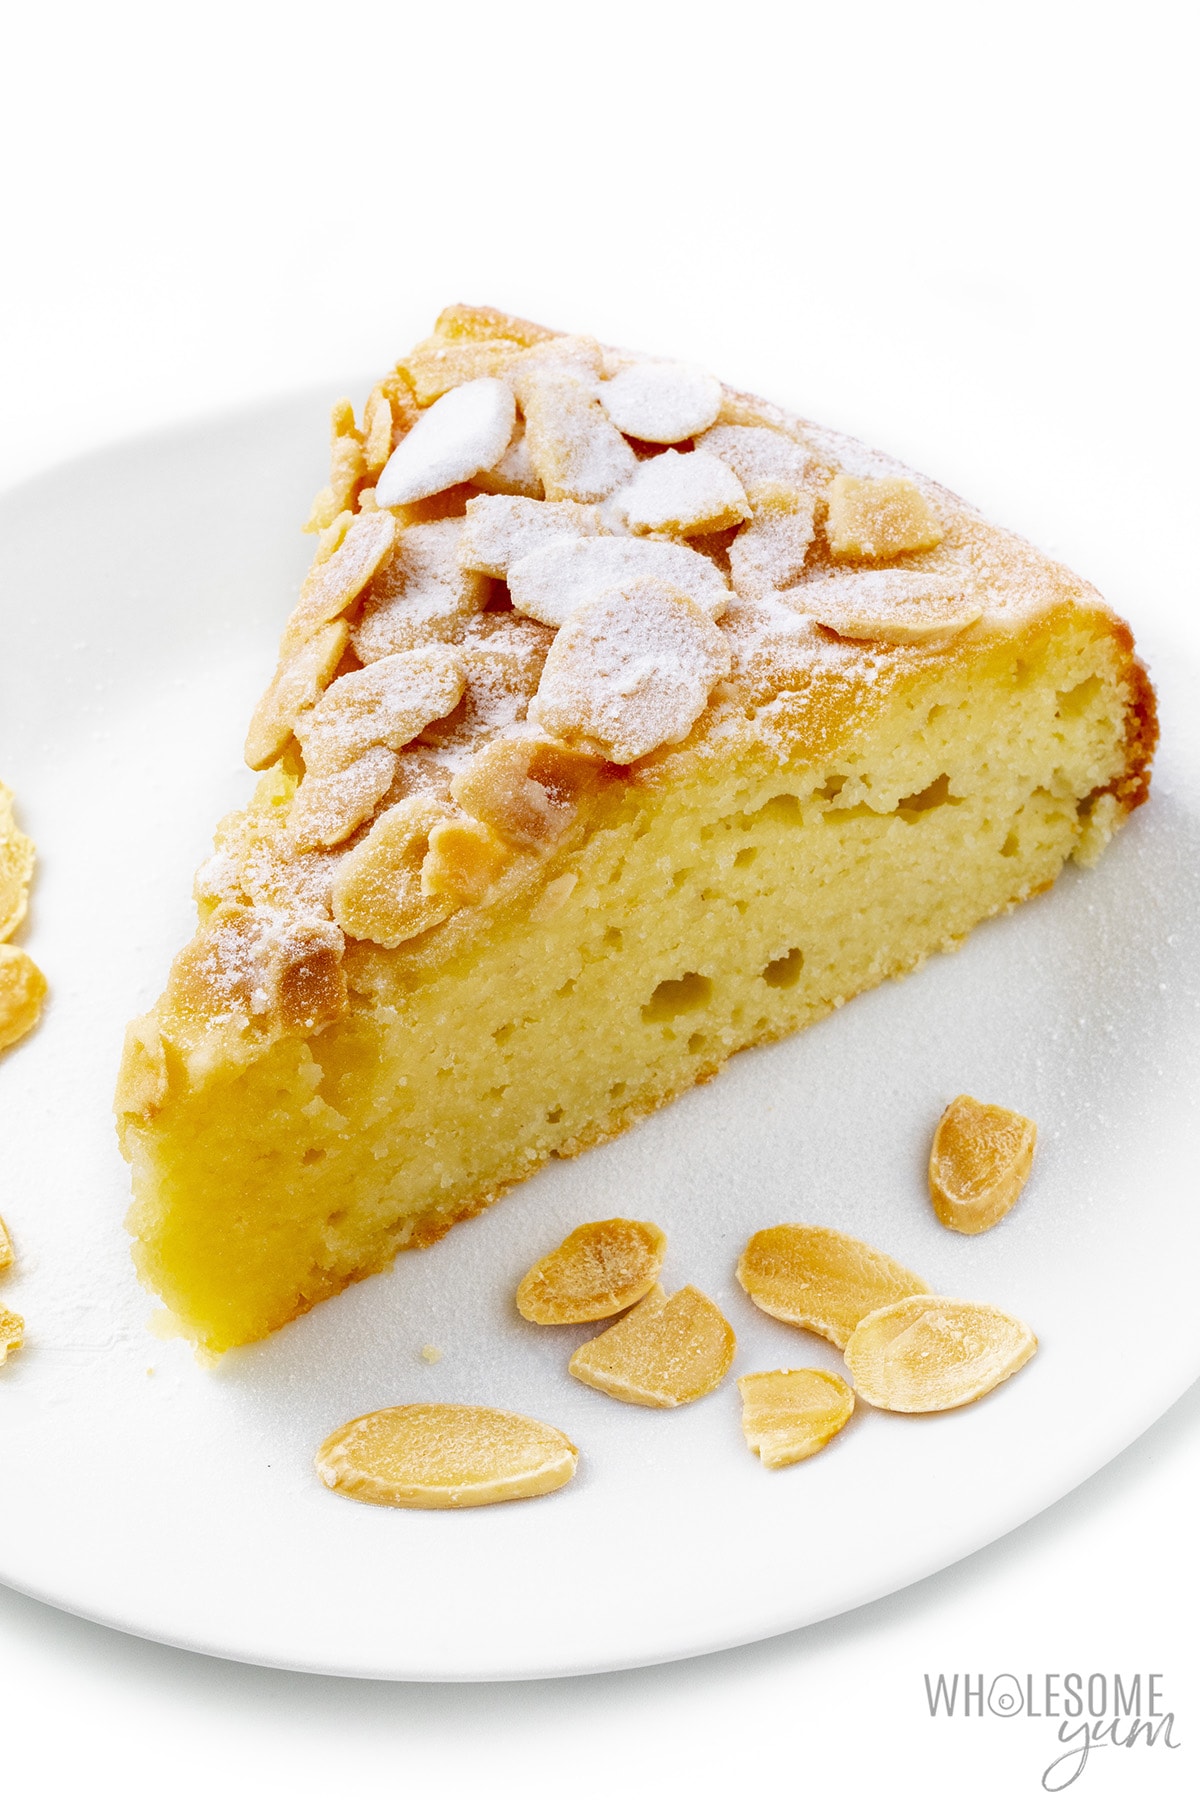 Slice of almond cake on a plate with sliced almonds and a dusting of powdered sweetener.